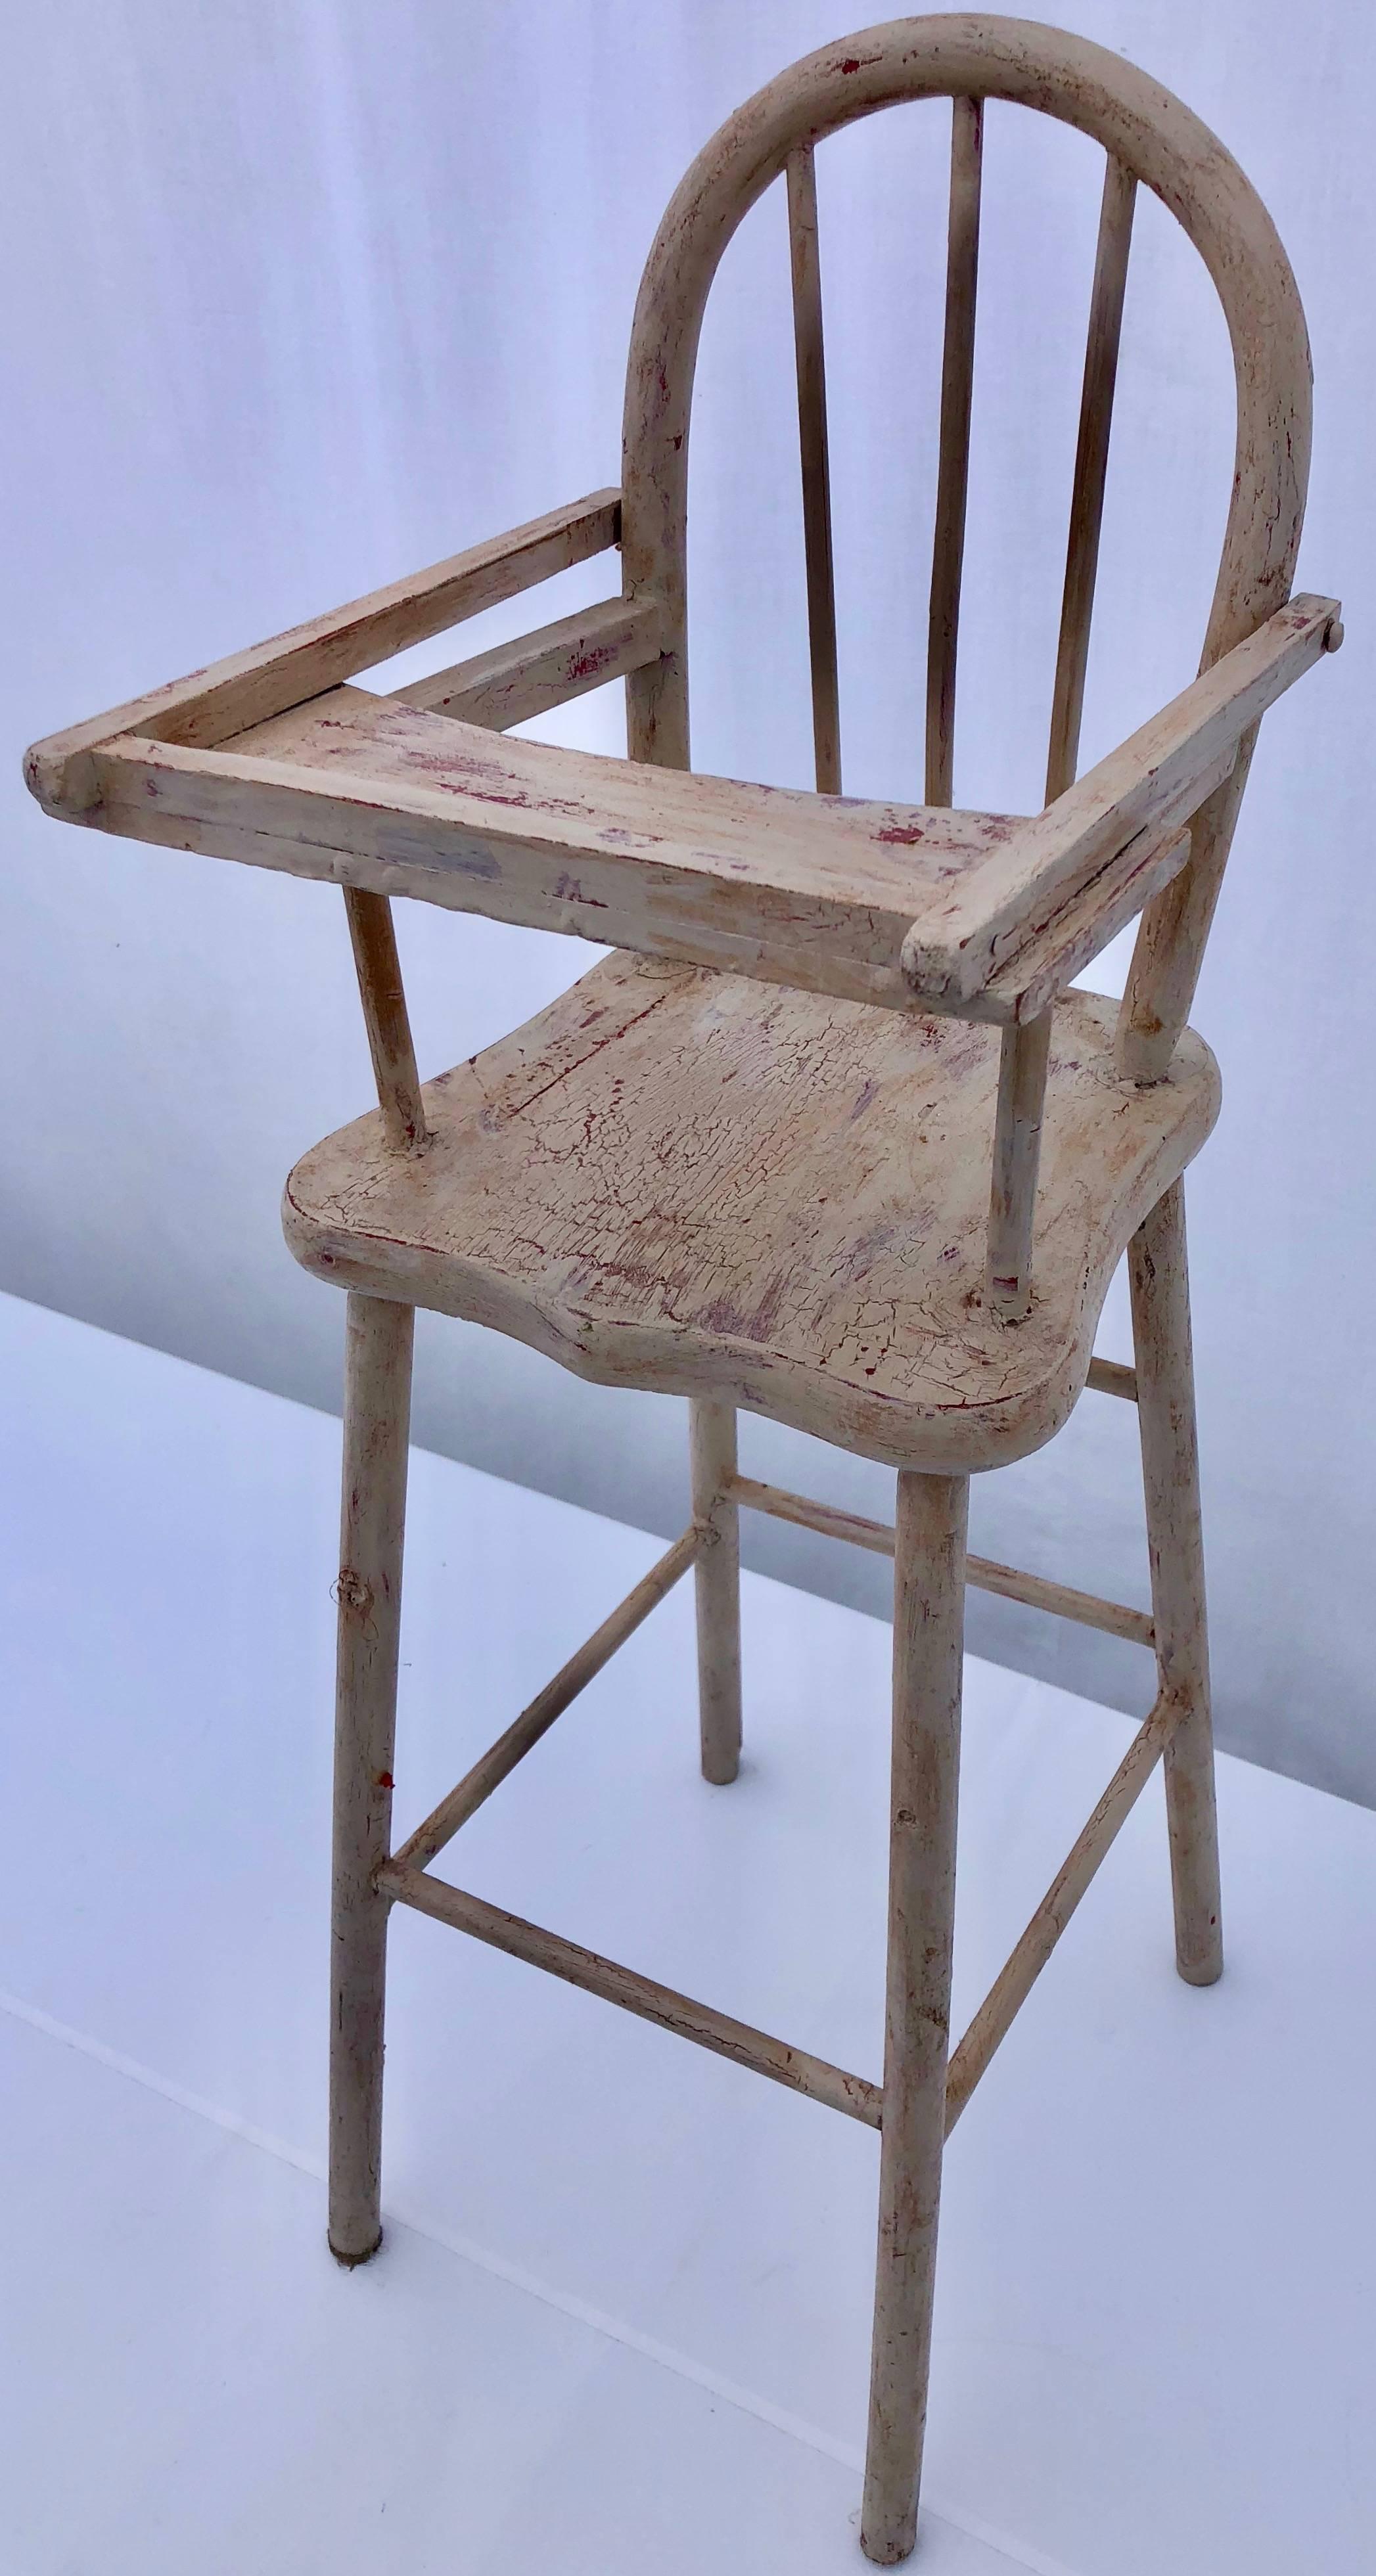 This French vintage doll high chair is solid wood, with it's back in a lovely rounded shape, and an articulated tray in a pretty pale pink color. When the tray is lifted it converts into a doll play seat. This would add a French touch to any doll